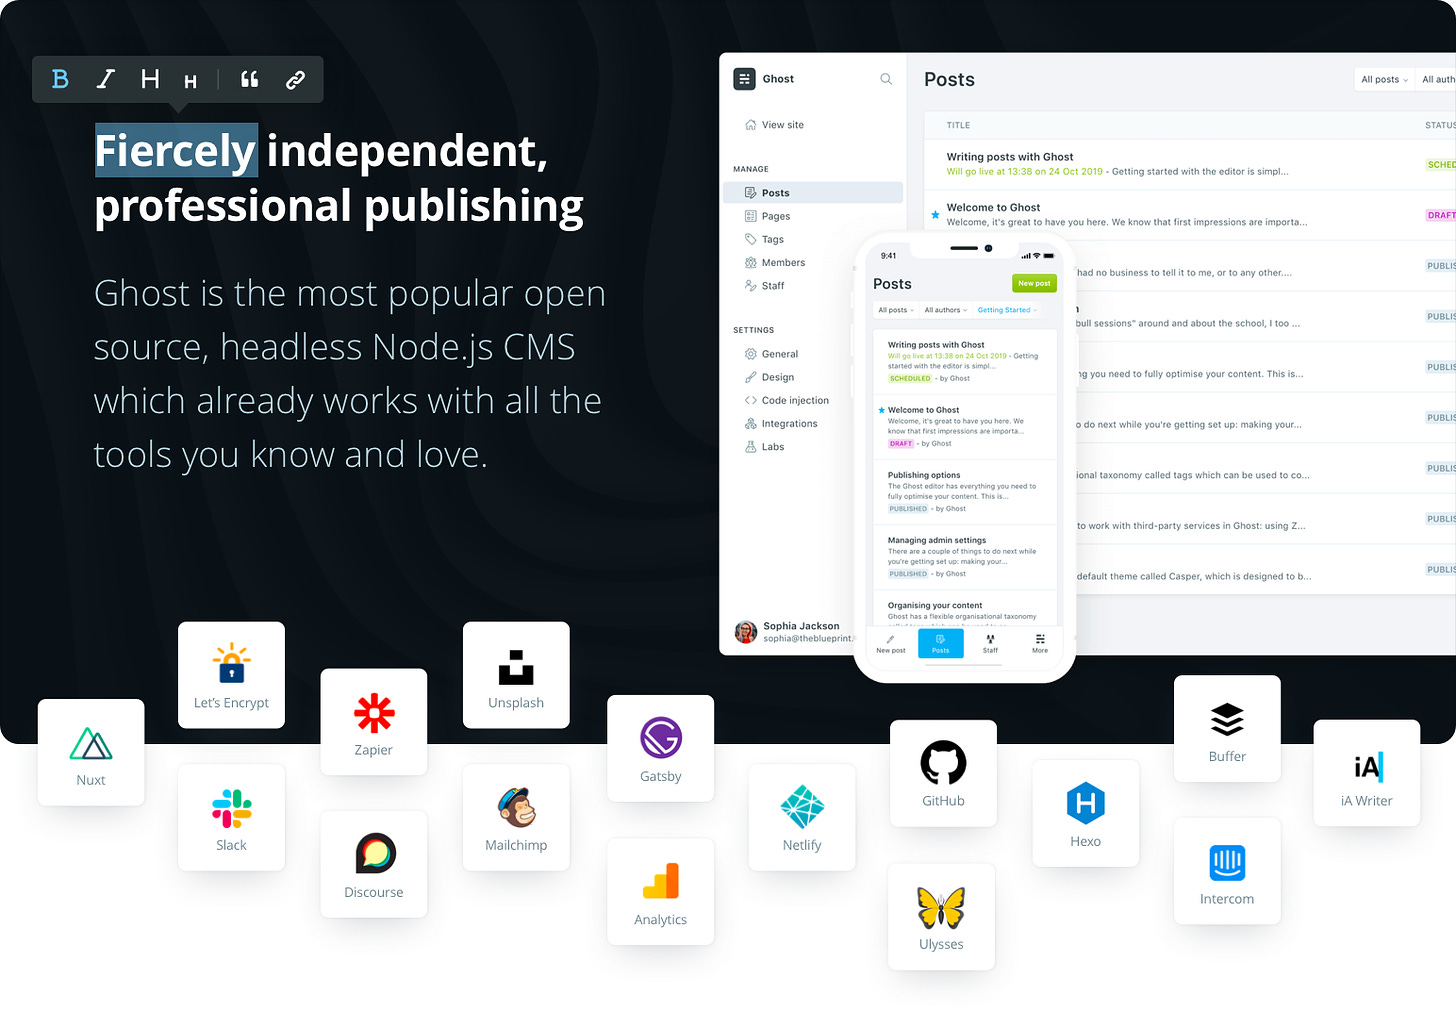 Fiercely independent, professional publishing. Ghost is the most popular open source, headless Node.js CMS which already works with all the tools you know and love.